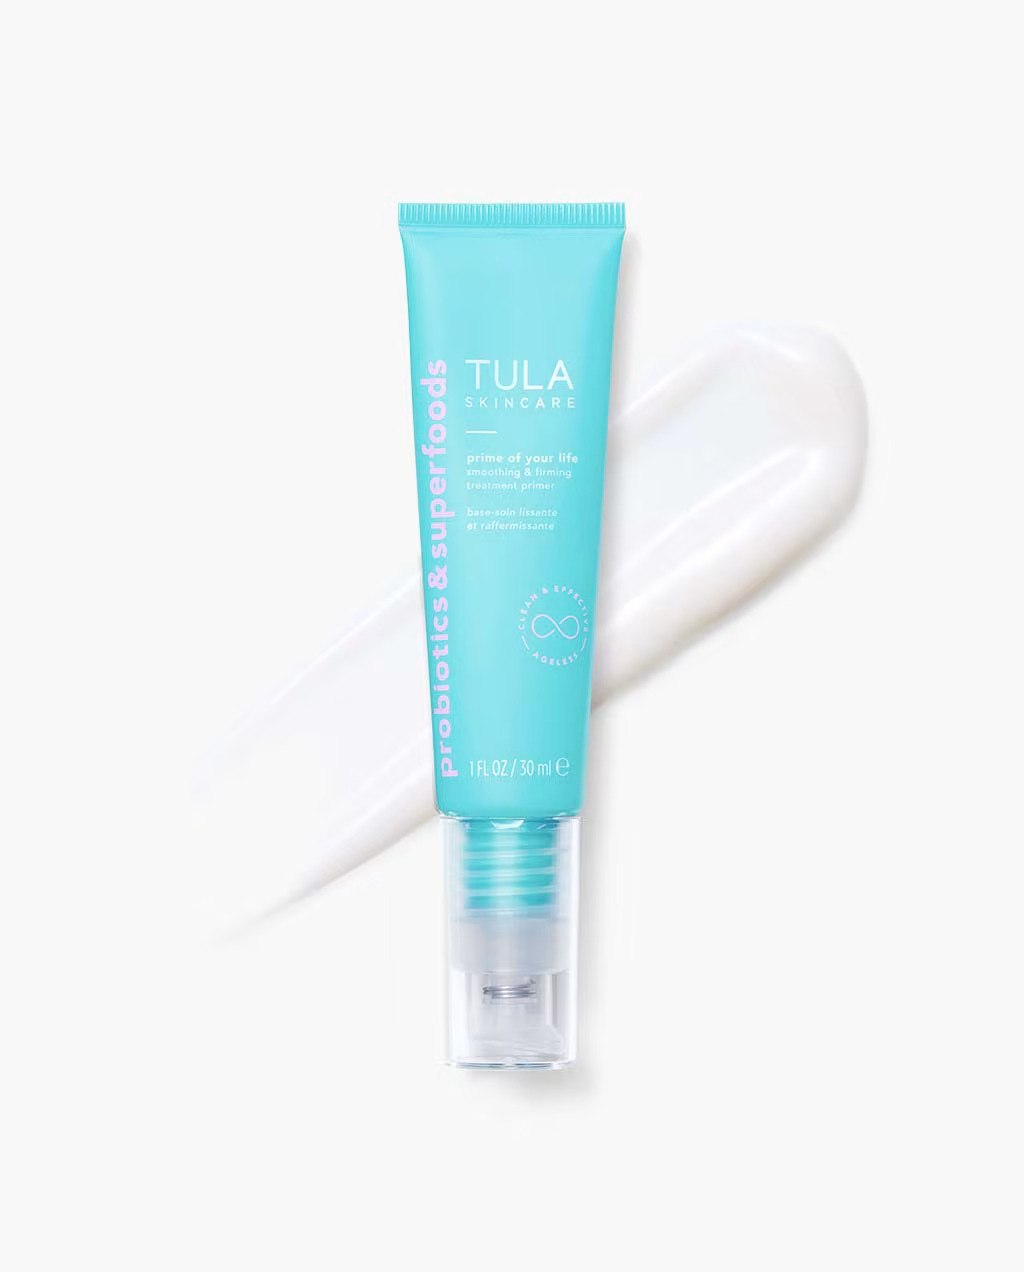 tula skincare smoothing and firming treatment primer with a swipe of product in the background